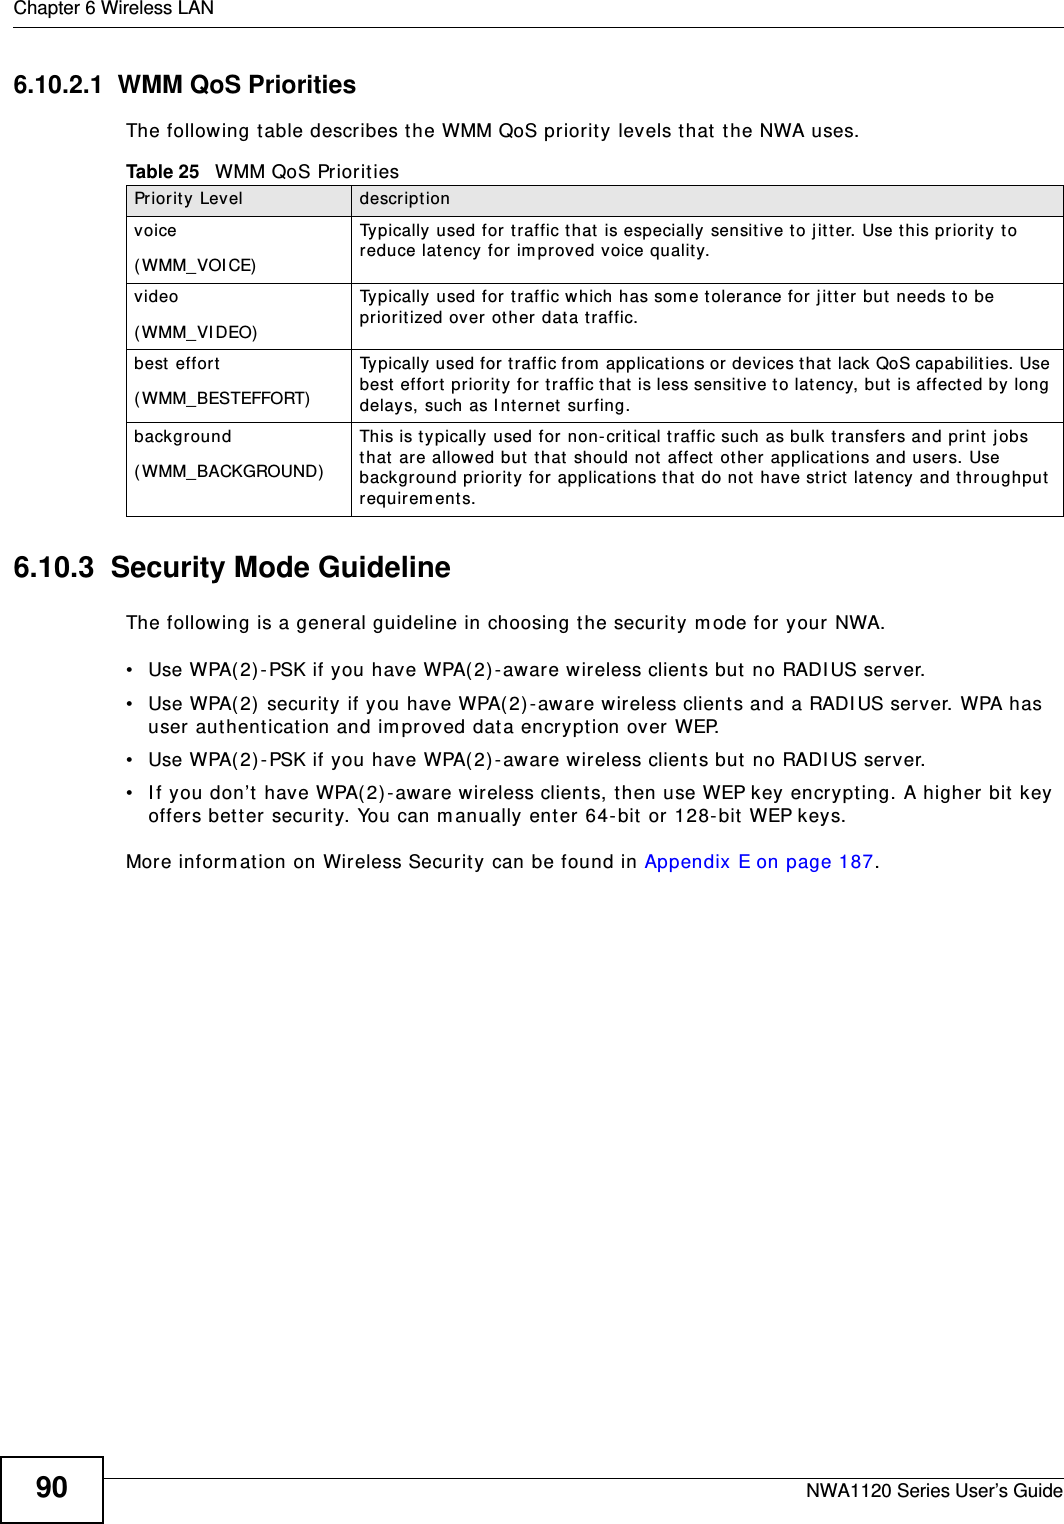 Chapter 6 Wireless LANNWA1120 Series User’s Guide906.10.2.1  WMM QoS PrioritiesThe following table describes the WMM QoS priority levels that the NWA uses.6.10.3  Security Mode GuidelineThe following is a general guideline in choosing the security mode for your NWA. • Use WPA(2)-PSK if you have WPA(2)-aware wireless clients but no RADIUS server.• Use WPA(2) security if you have WPA(2)-aware wireless clients and a RADIUS server. WPA has user authentication and improved data encryption over WEP.• Use WPA(2)-PSK if you have WPA(2)-aware wireless clients but no RADIUS server.    • If you don’t have WPA(2)-aware wireless clients, then use WEP key encrypting. A higher bit key offers better security. You can manually enter 64-bit or 128-bit WEP keys.More information on Wireless Security can be found in Appendix E on page 187. Table 25   WMM QoS PrioritiesPriority Level descriptionvoice(WMM_VOICE)Typically used for traffic that is especially sensitive to jitter. Use this priority to reduce latency for improved voice quality.video(WMM_VIDEO)Typically used for traffic which has some tolerance for jitter but needs to be prioritized over other data traffic.best effort(WMM_BESTEFFORT)Typically used for traffic from applications or devices that lack QoS capabilities. Use best effort priority for traffic that is less sensitive to latency, but is affected by long delays, such as Internet surfing.background(WMM_BACKGROUND)This is typically used for non-critical traffic such as bulk transfers and print jobs that are allowed but that should not affect other applications and users. Use background priority for applications that do not have strict latency and throughput requirements.